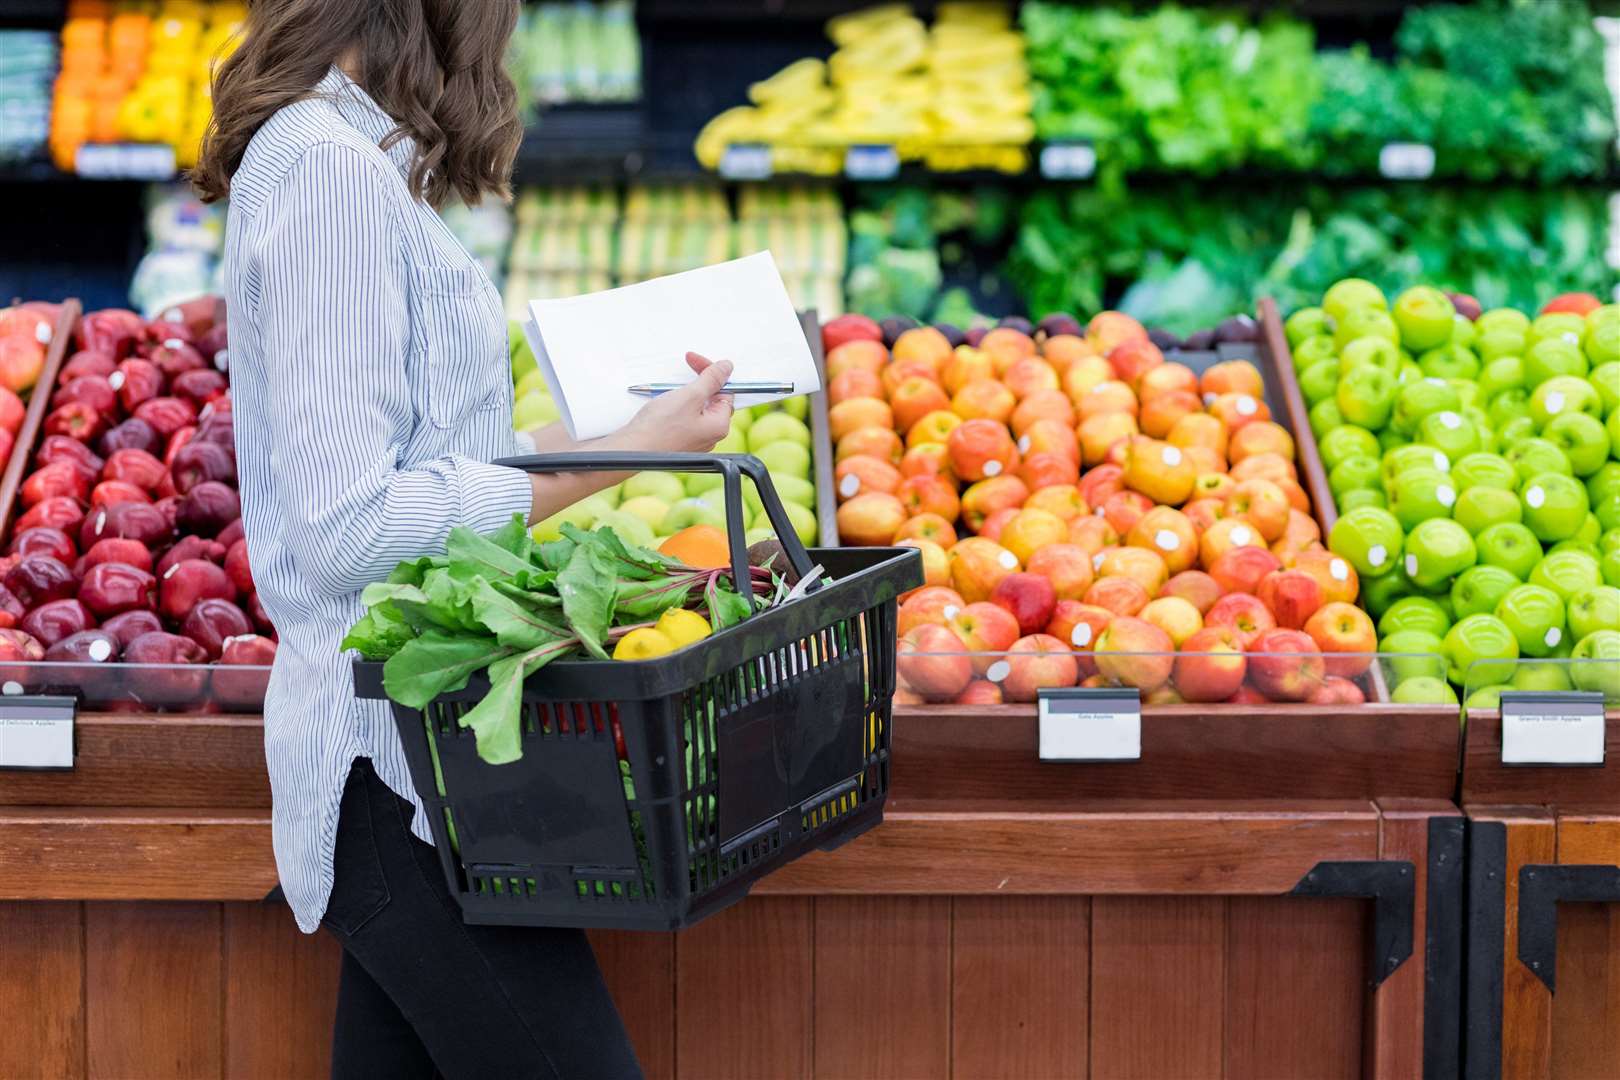 A study of 25,000 items at eight supermarkets is tracking rising prices. Image: Stock photo.